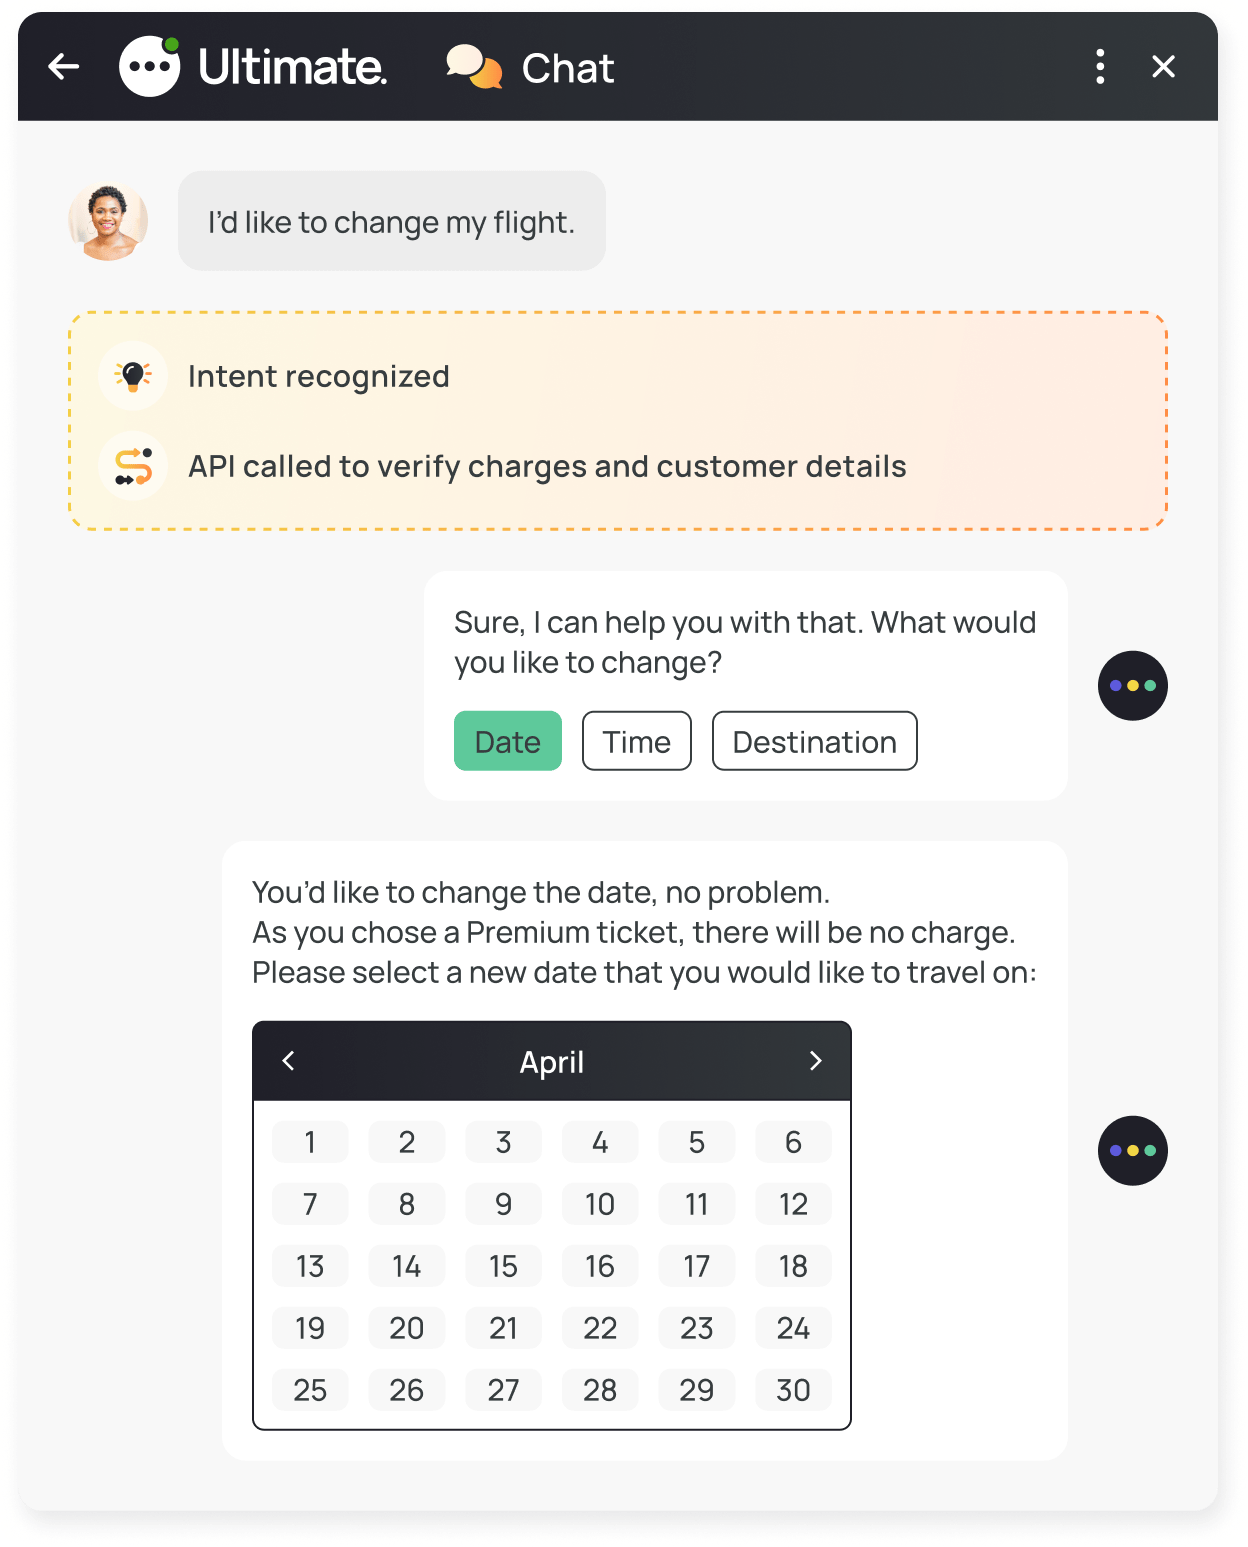 An AI-powered bot conversation displaying how to automate flight booking changes.